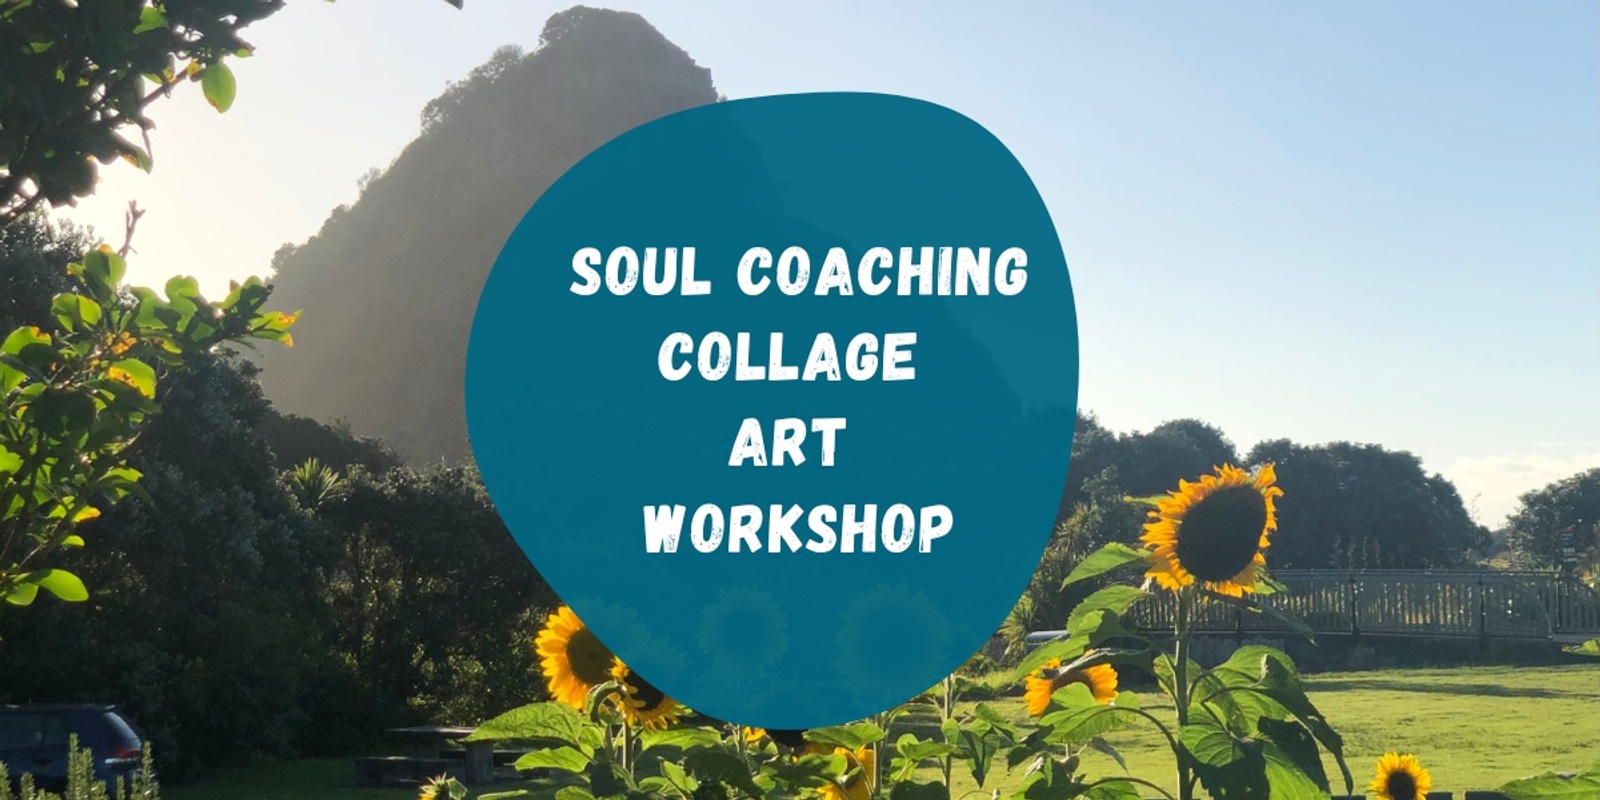 Banner image for Soul Coaching Collage Art Workshop, Barnett Hall, Saturday 23 March 10am-5pm